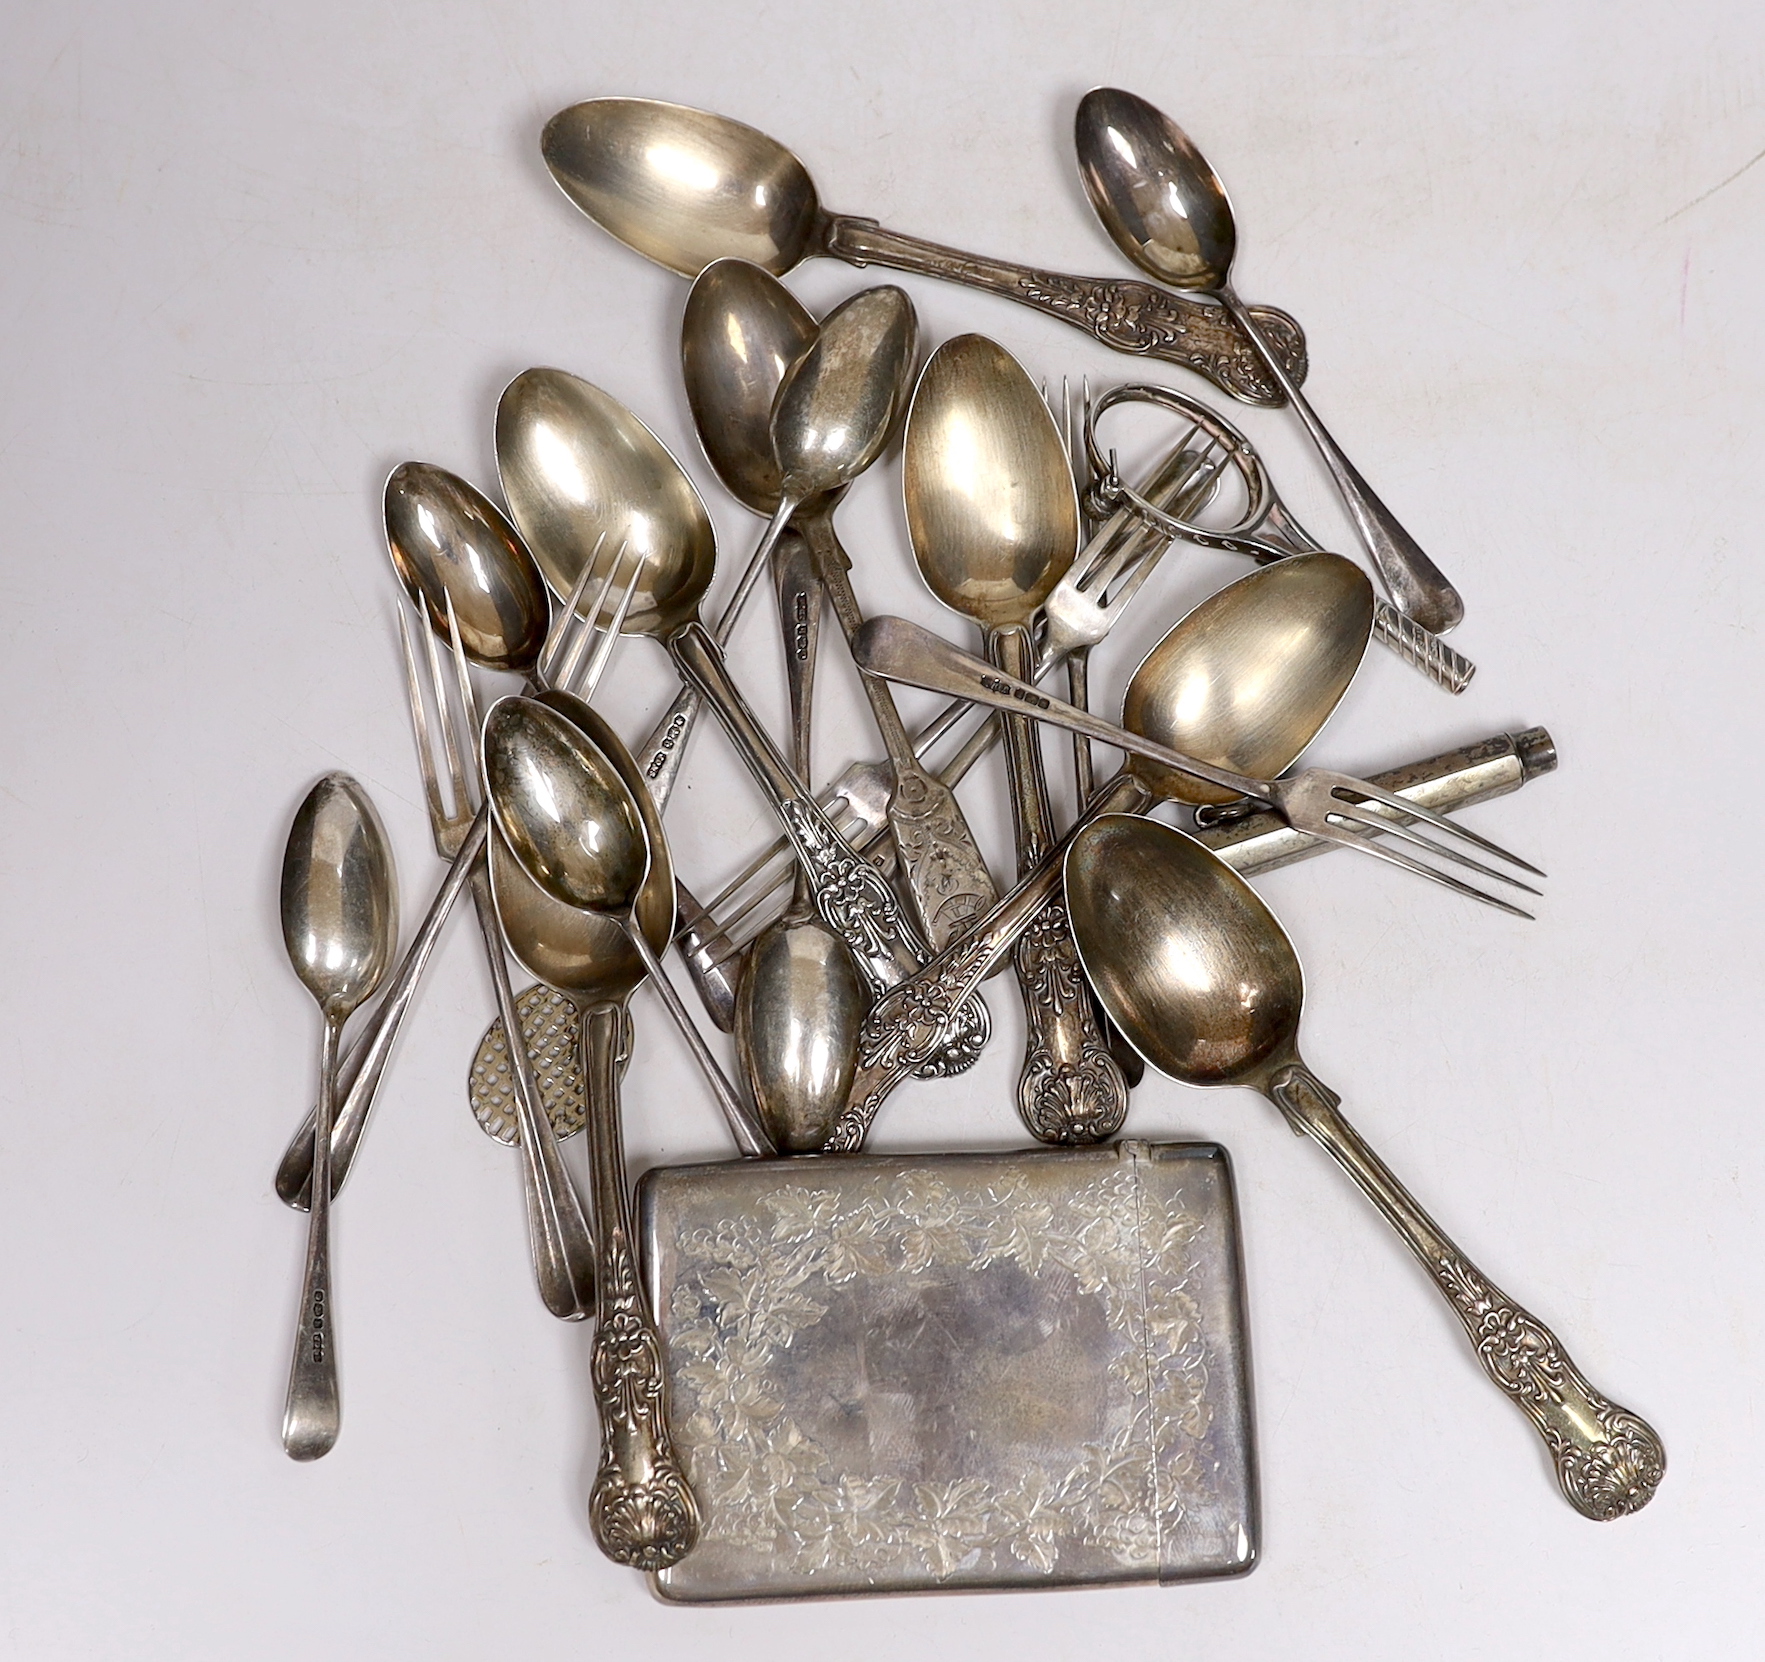 A late Victorian engraved silver rectangular card case, London, 1883, 9.9cm, eighteen items of assorted silver flatware including a set of six George IV silver Queens pattern teaspoons,1827/8, a silver pencil and a tenni